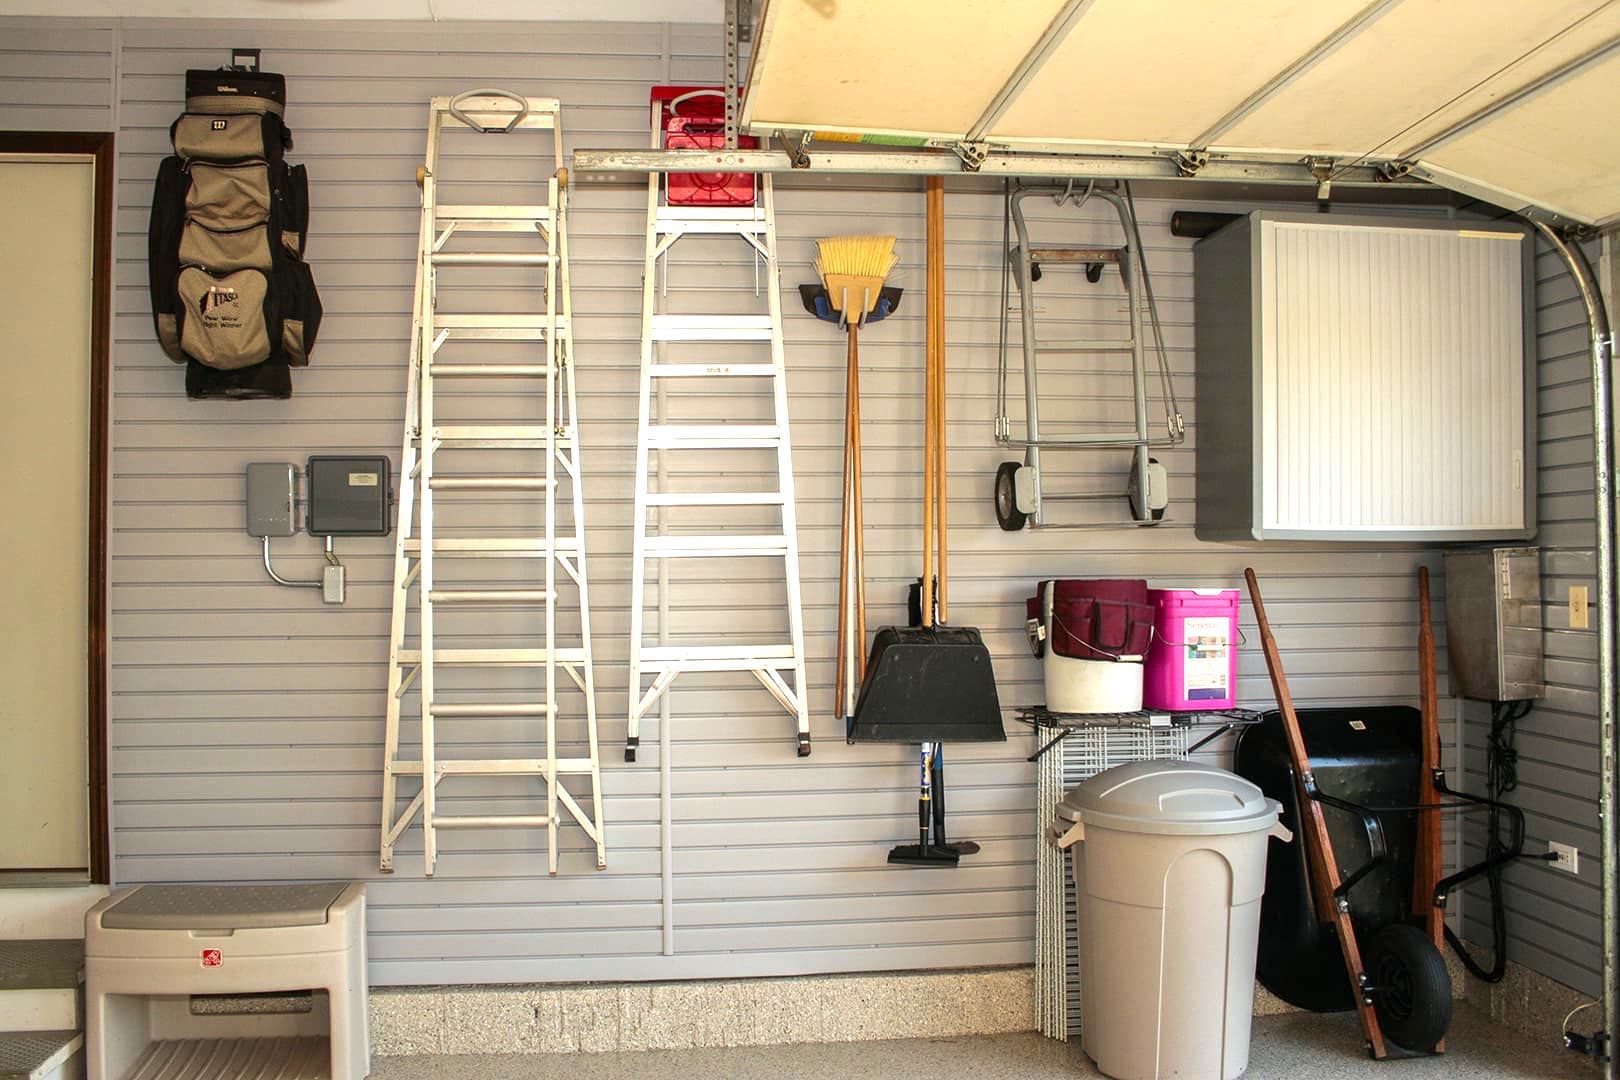 Slatwall systems helps keep ladders and other equipment out of the way.